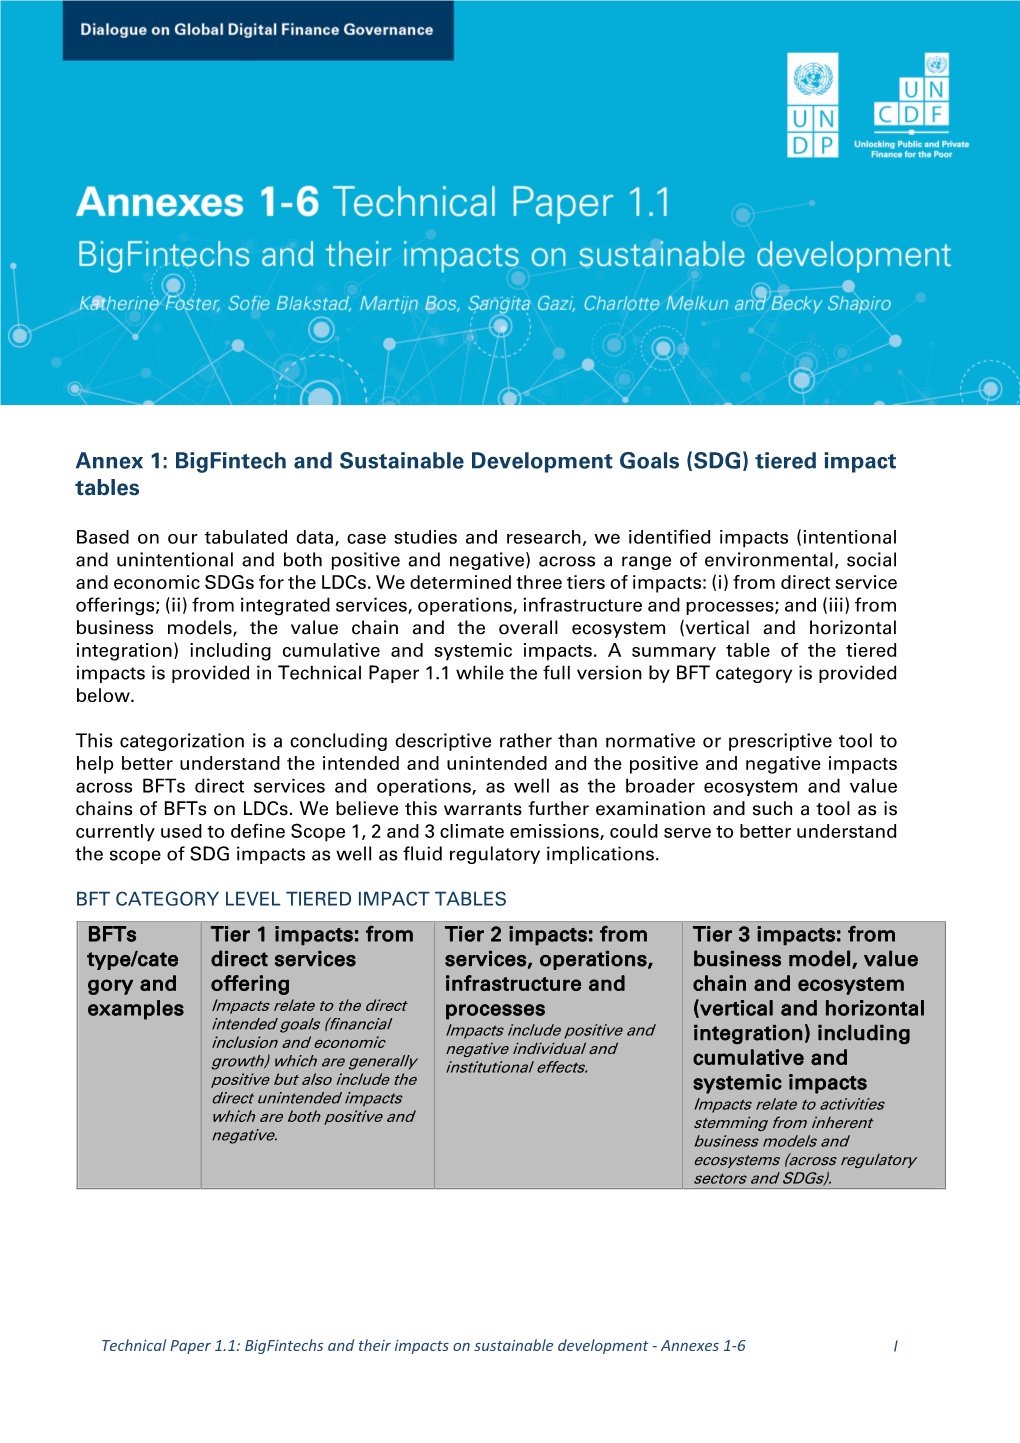 Annex 1: Bigfintech and Sustainable Development Goals (SDG) Tiered Impact Tables